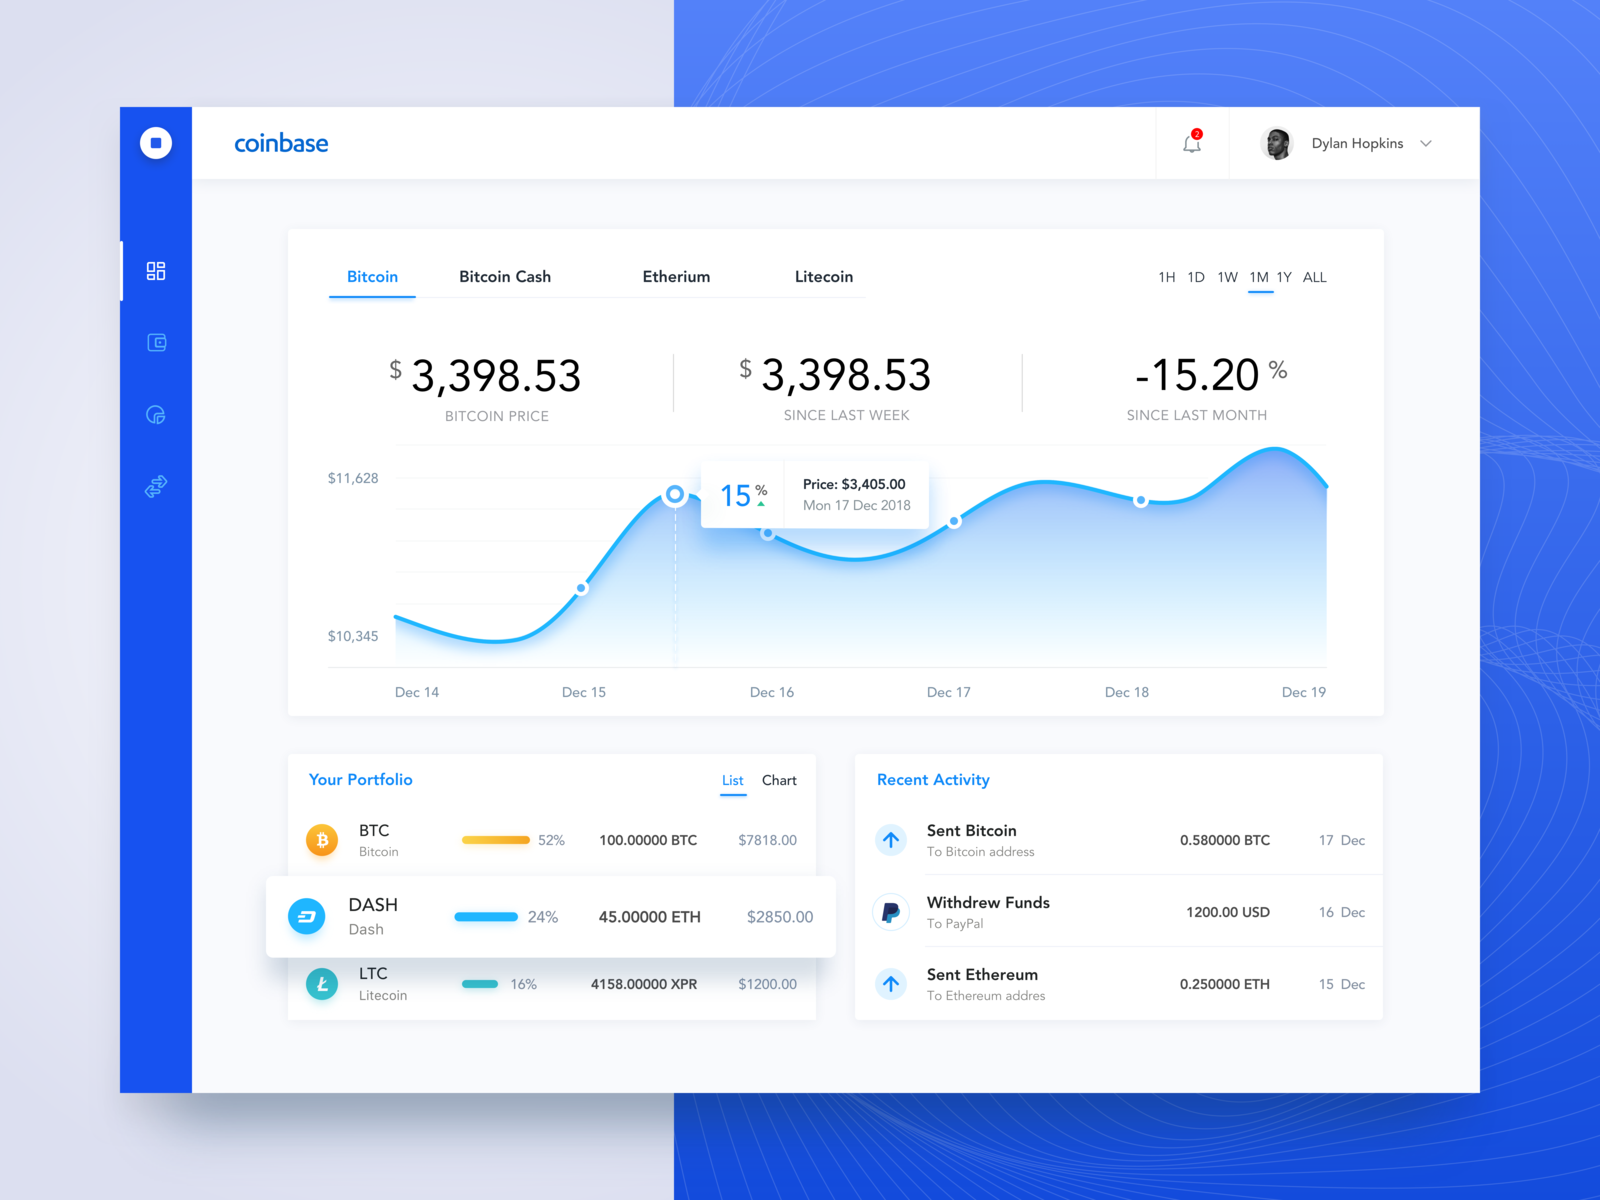 Coinbase dashboard by Alexey Ivashentsev on Dribbble